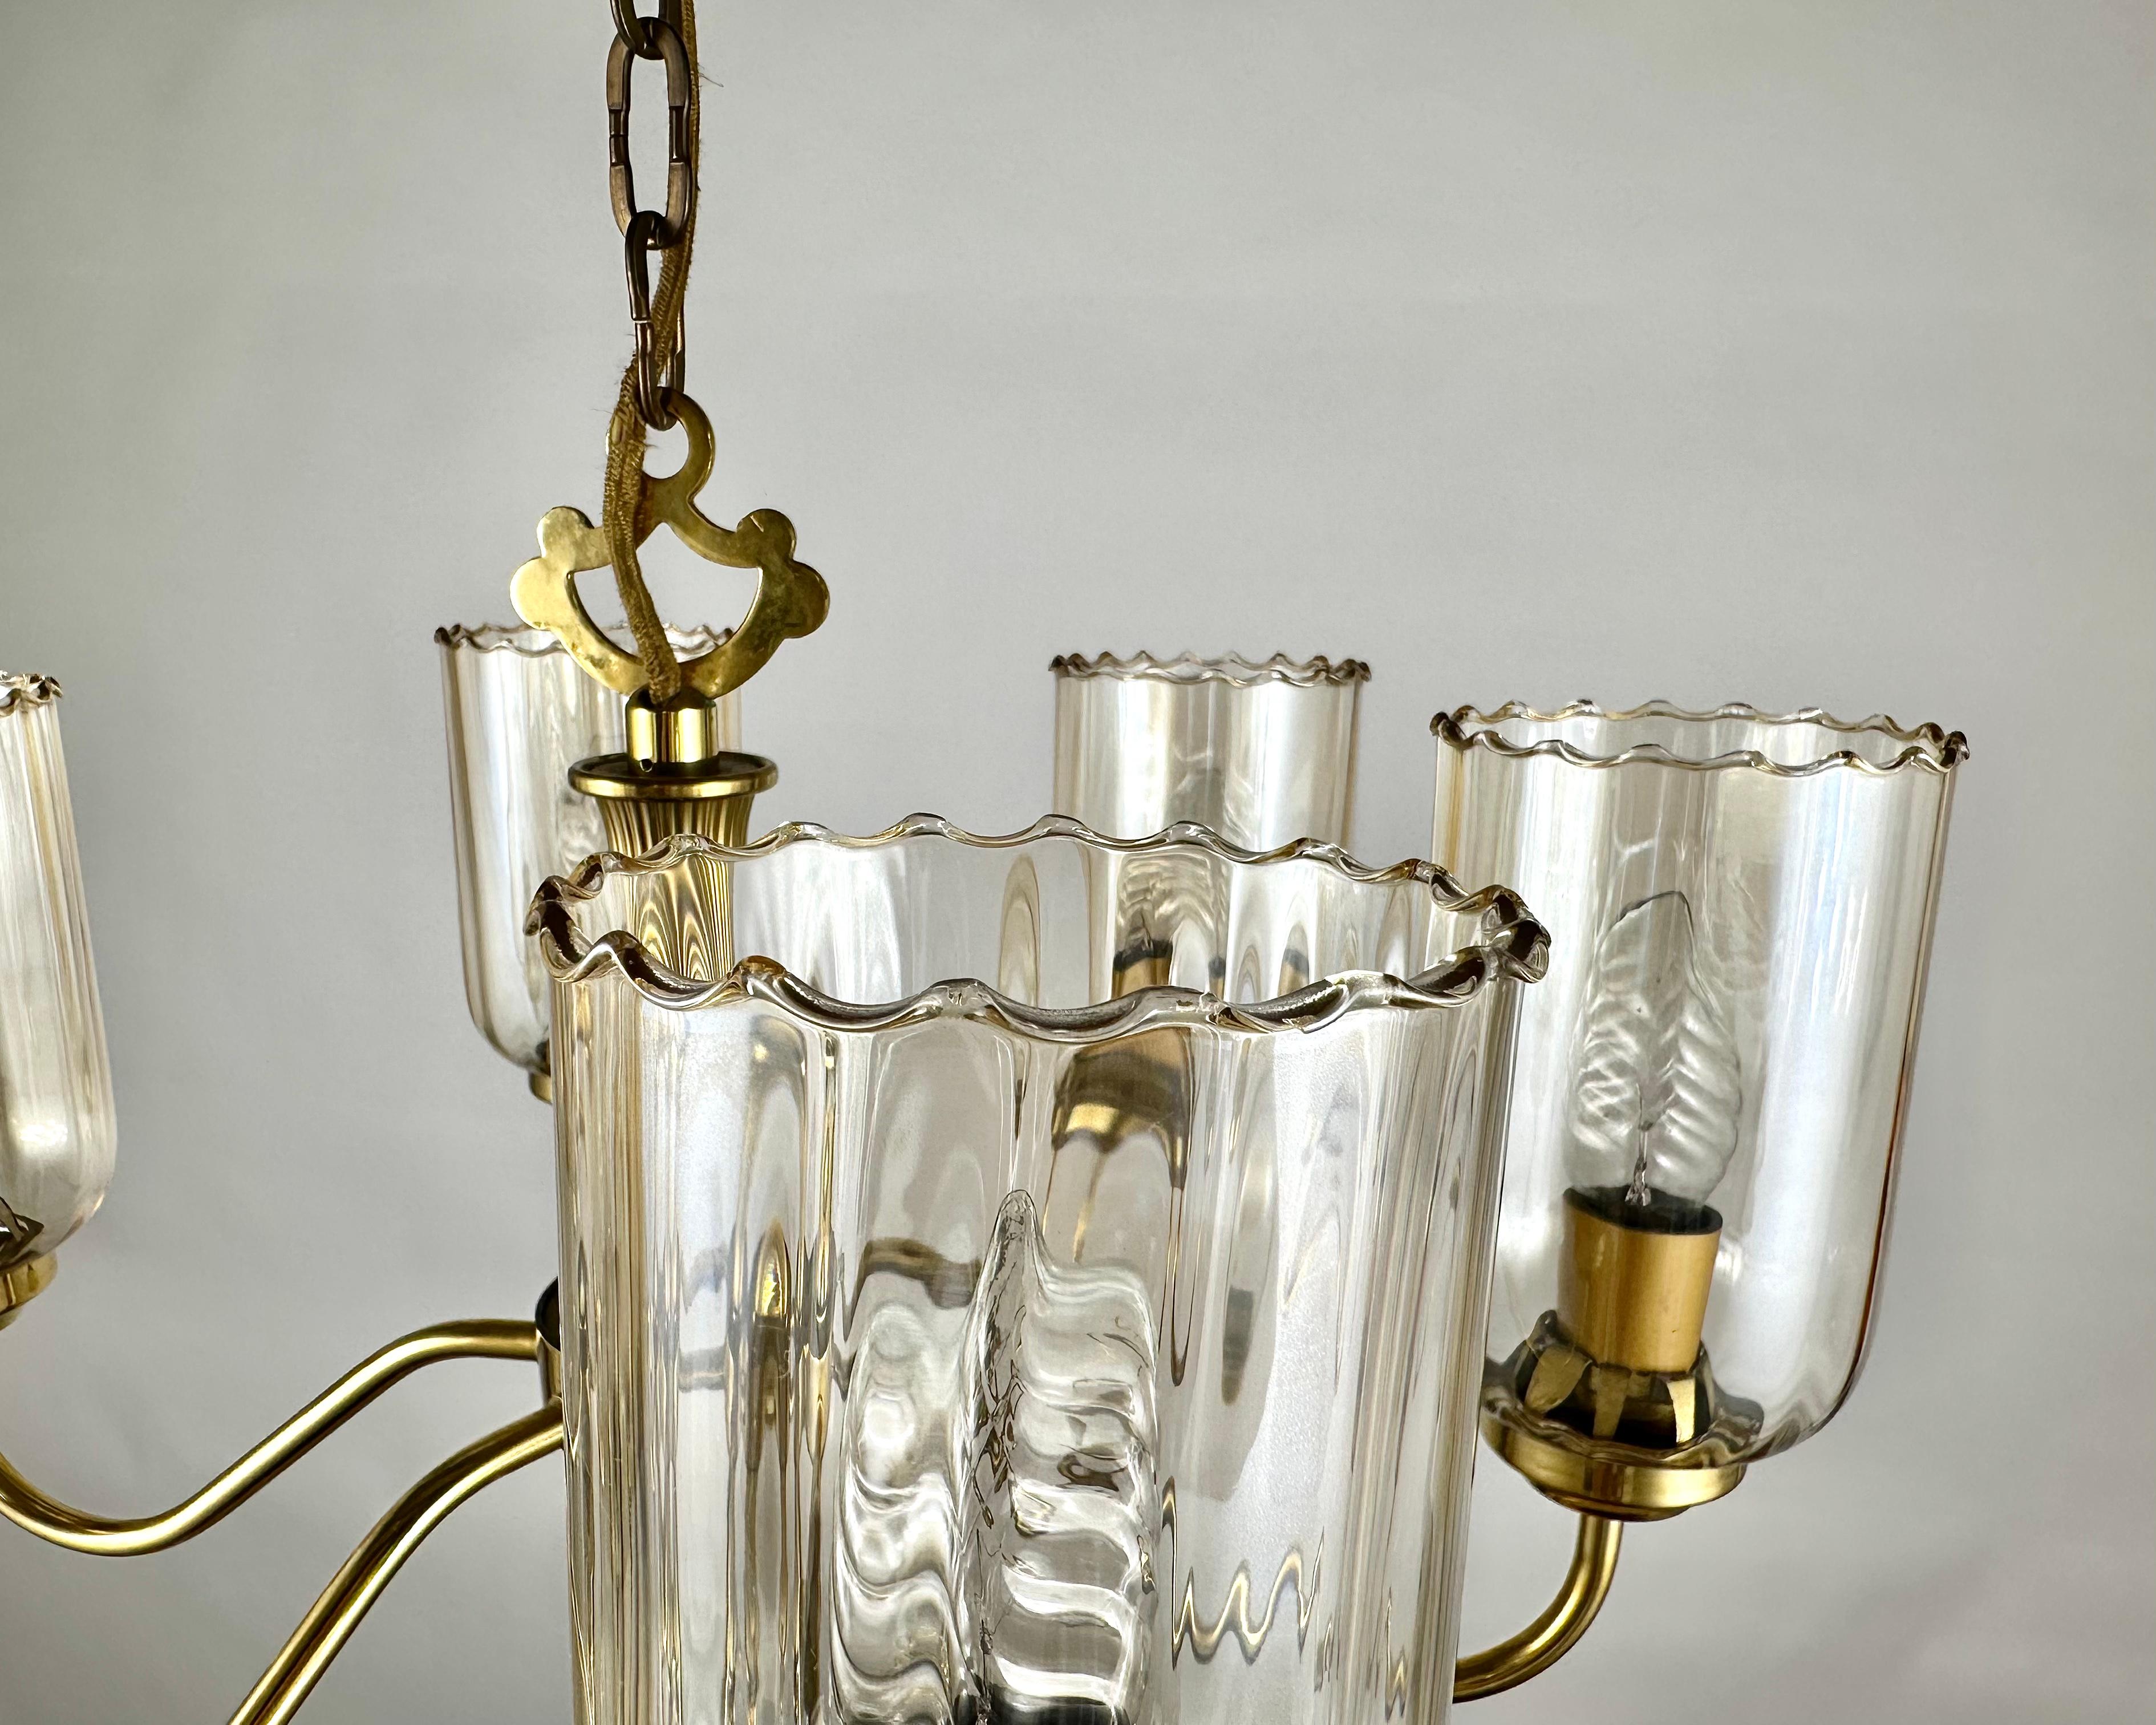 Vintage Ceiling Chandelier With Six Glass Lampshades, Germany, 1970s For Sale 3